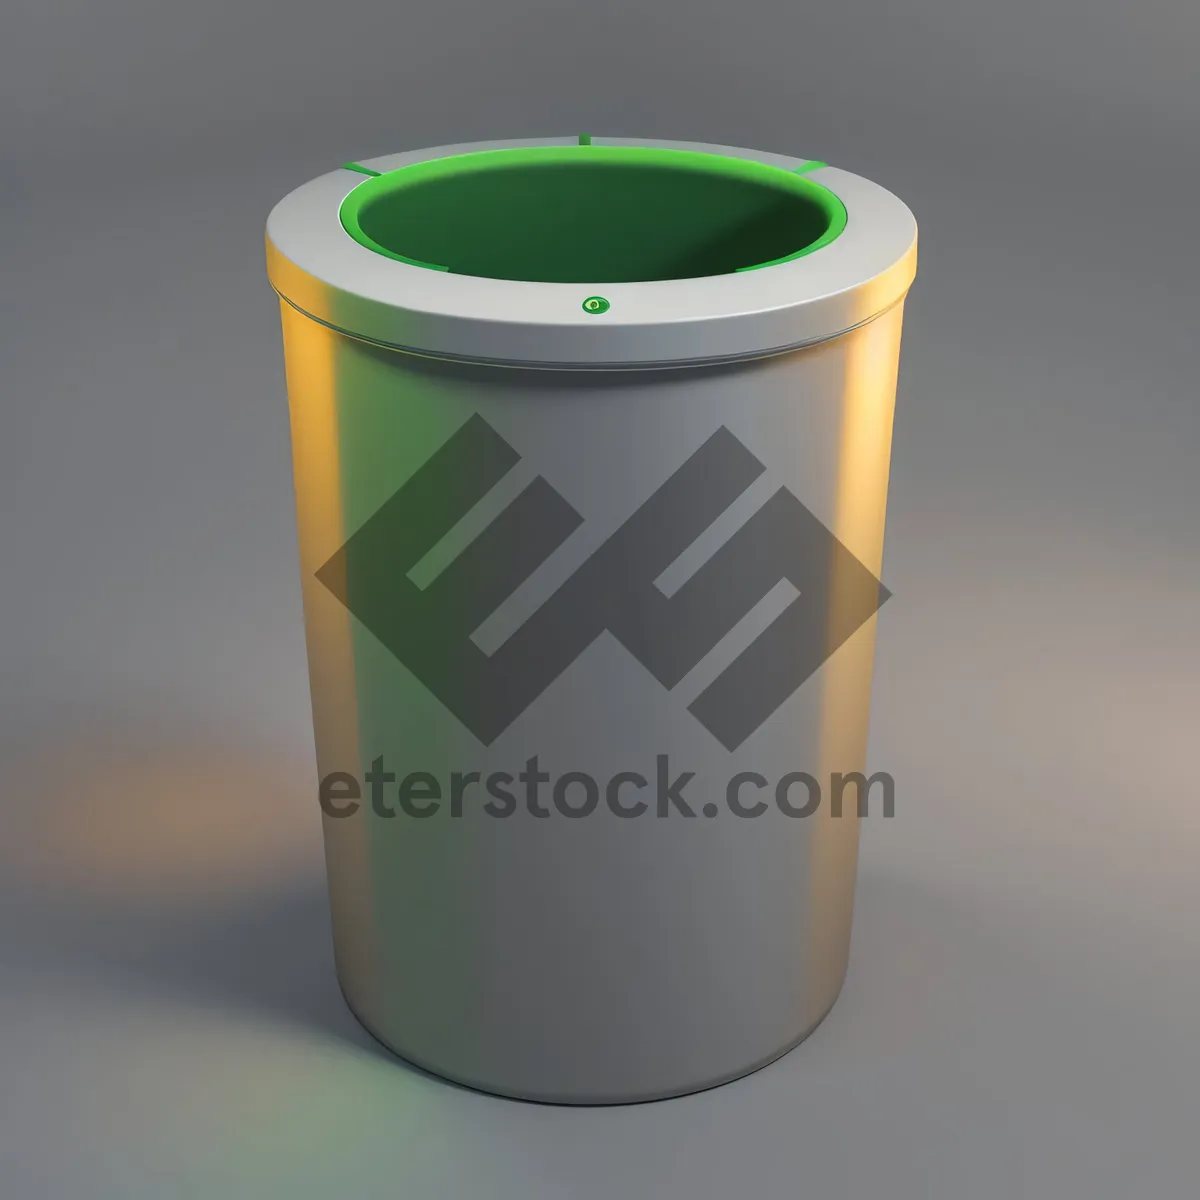 Picture of Beverage Container: Empty Plastic Cup